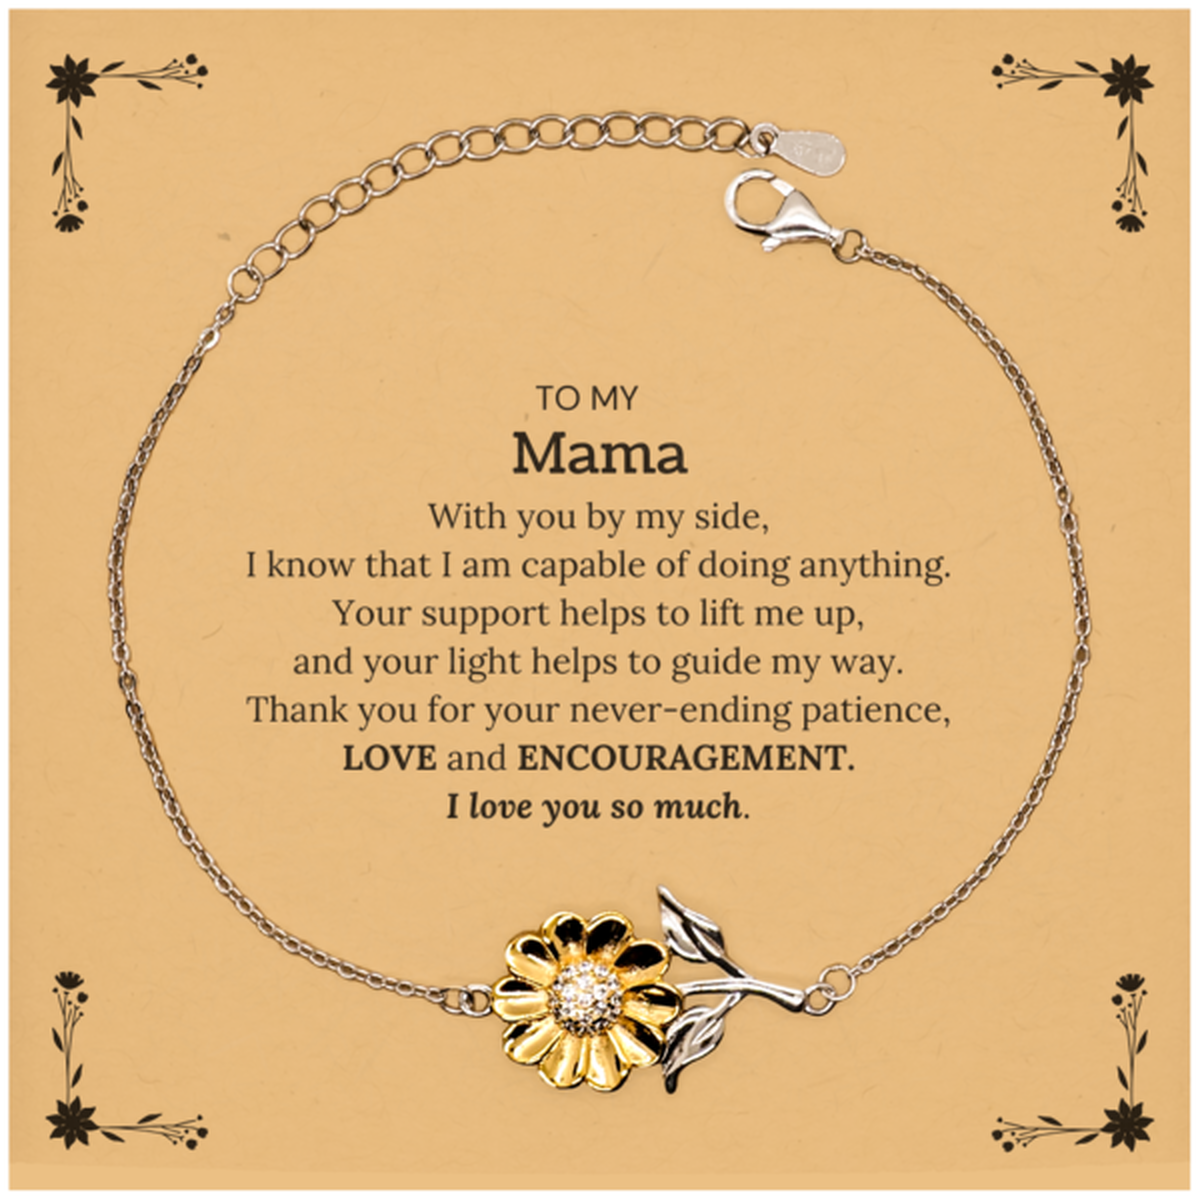 Appreciation Mama Sunflower Bracelet Gifts, To My Mama Birthday Christmas Wedding Keepsake Gifts for Mama With you by my side, I know that I am capable of doing anything. I love you so much